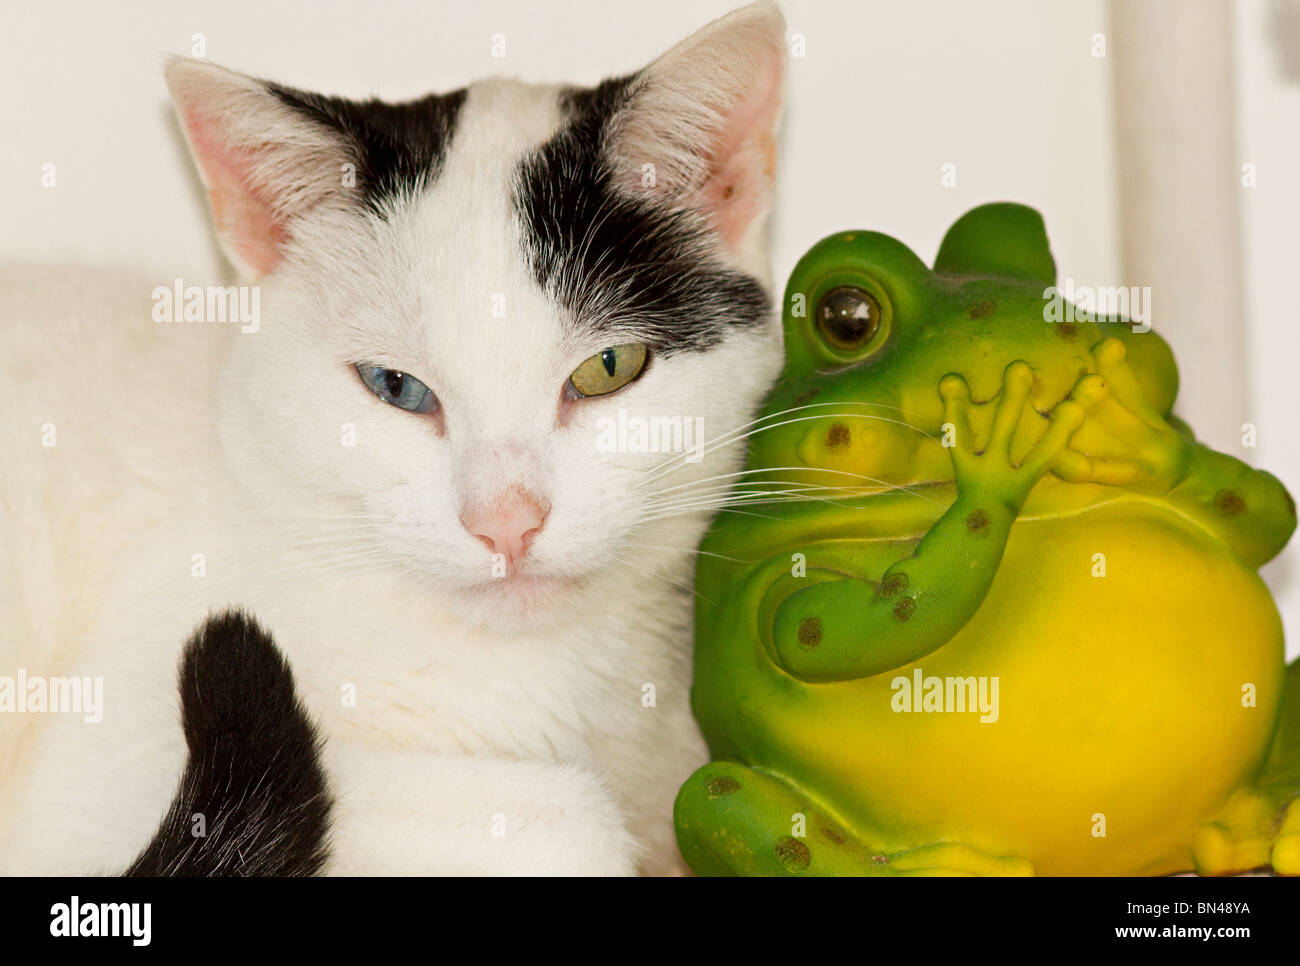 A single young odd eyed domestic cat (Felis catus) cuddled up next to a frog ornament Stock Photo